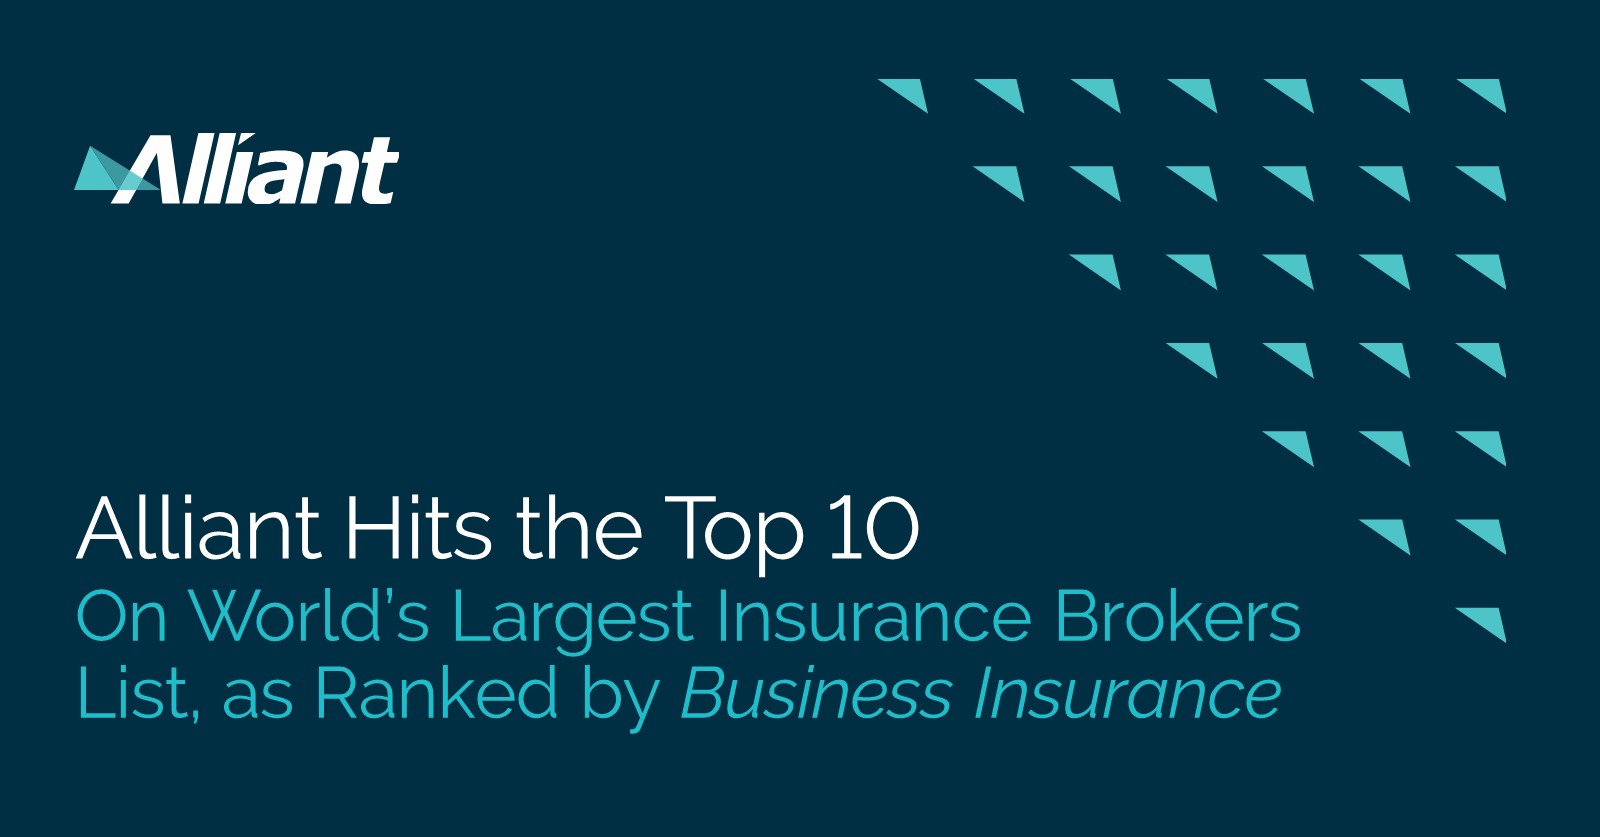 Alliant Hits the Top 10 on Business Insurance’s World’s Largest Brokers List